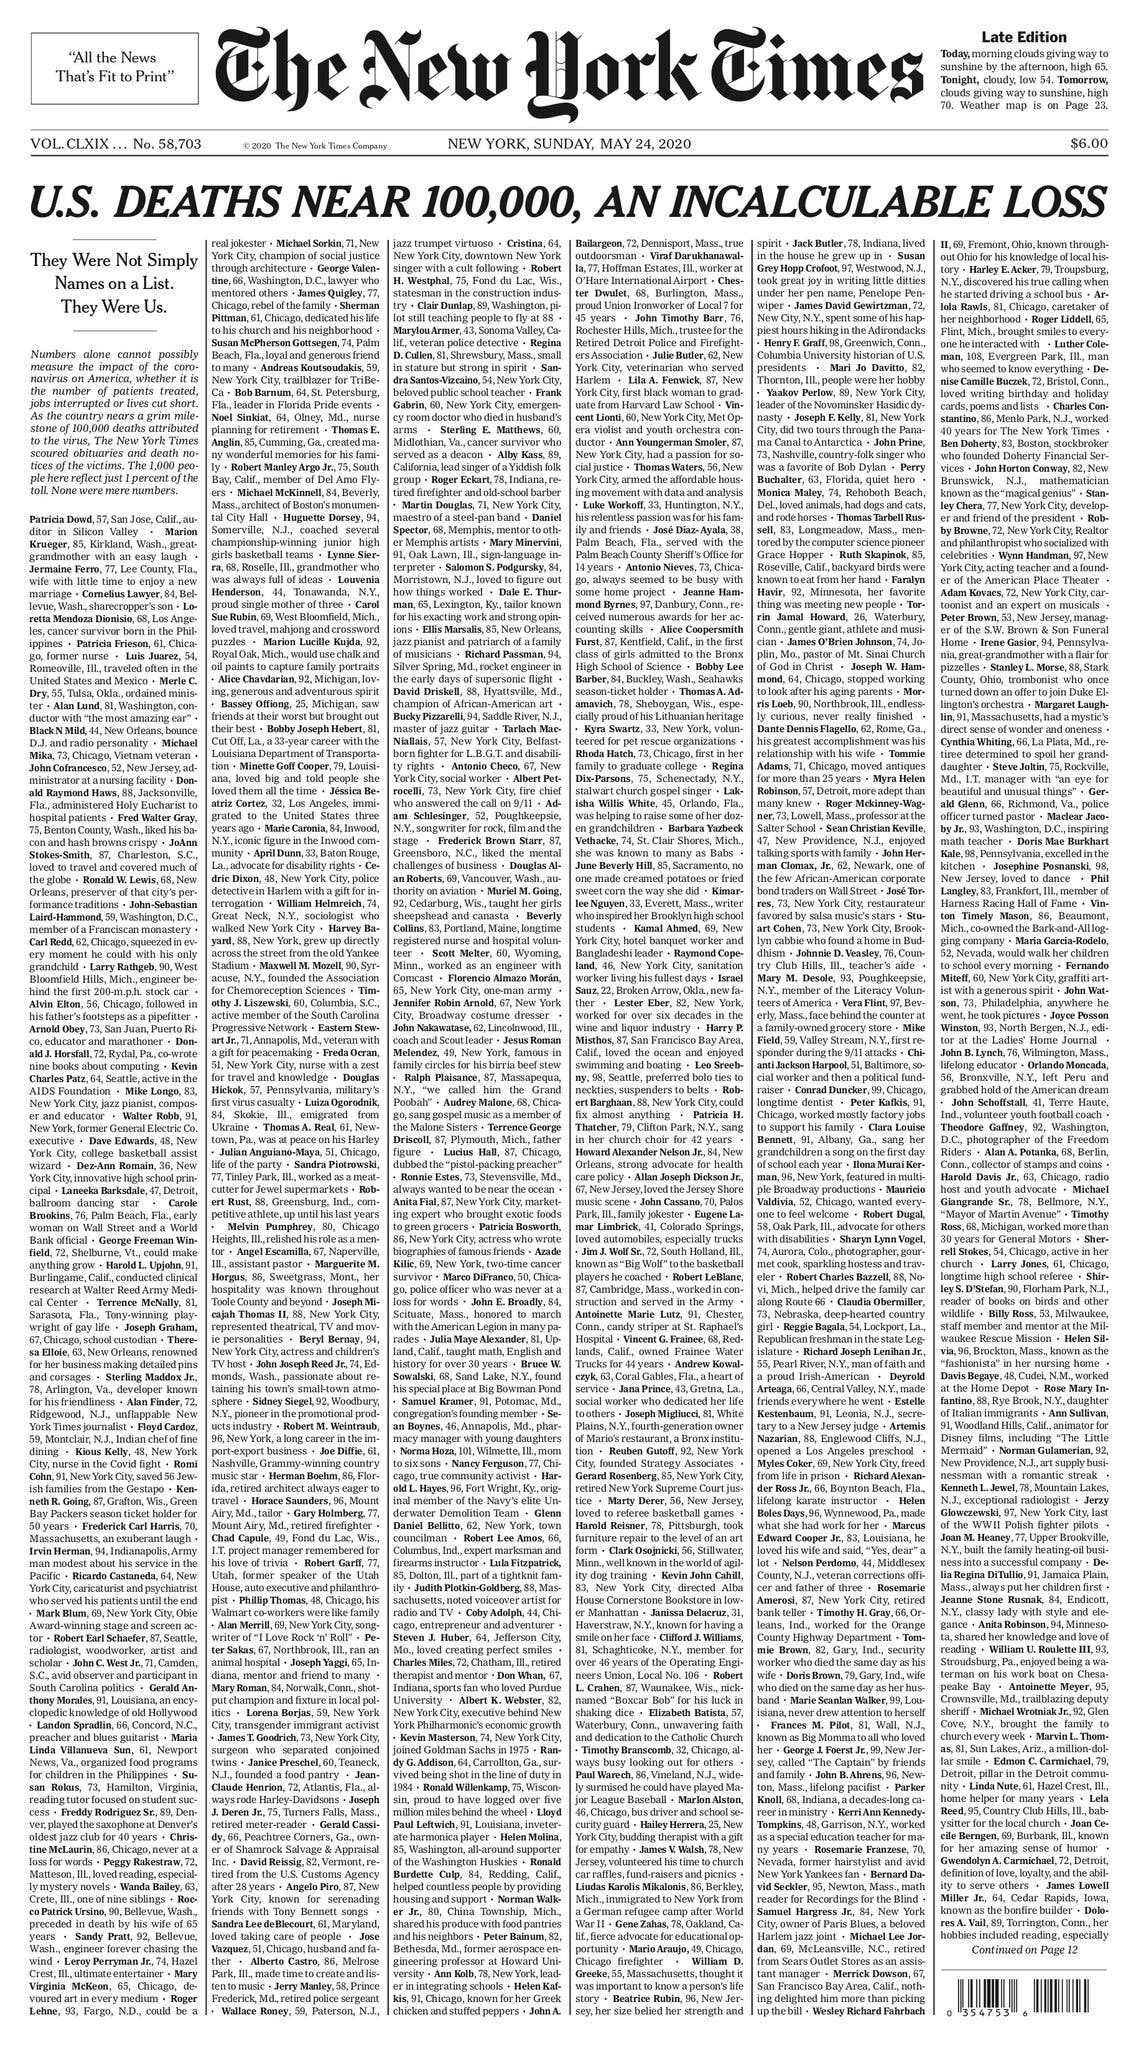 A front page of the New York Times, with the names and obituaries of people who died from Covid-19